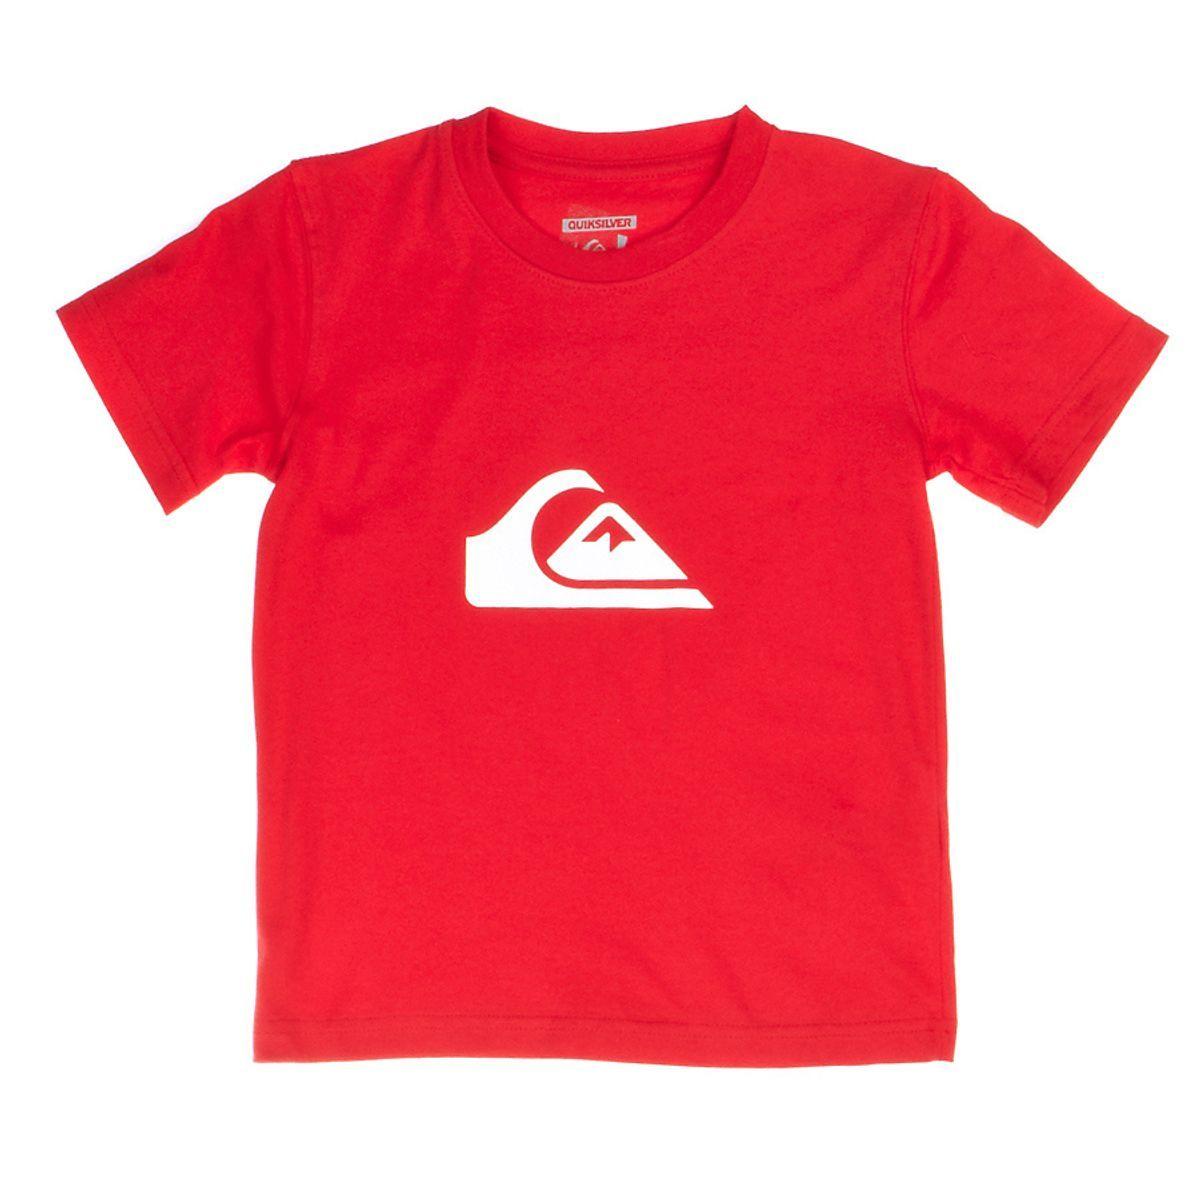 Wave and Red Mountain Logo - Quiksilver Logo Mountain And Waves Toddler T Shirt Red. Free